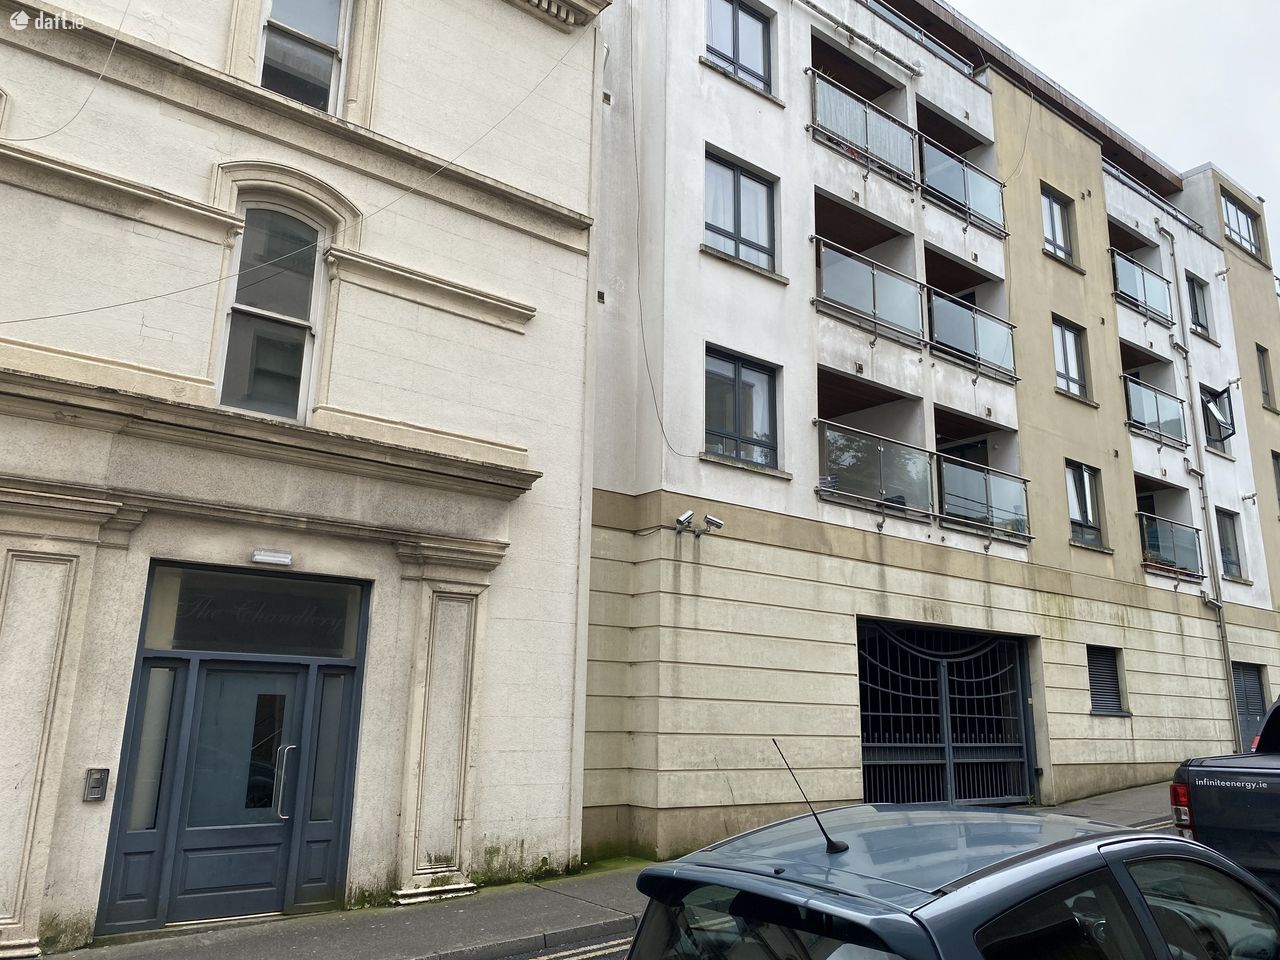 Apartment 18, The Chandlery, Waterford City, Co. Waterford